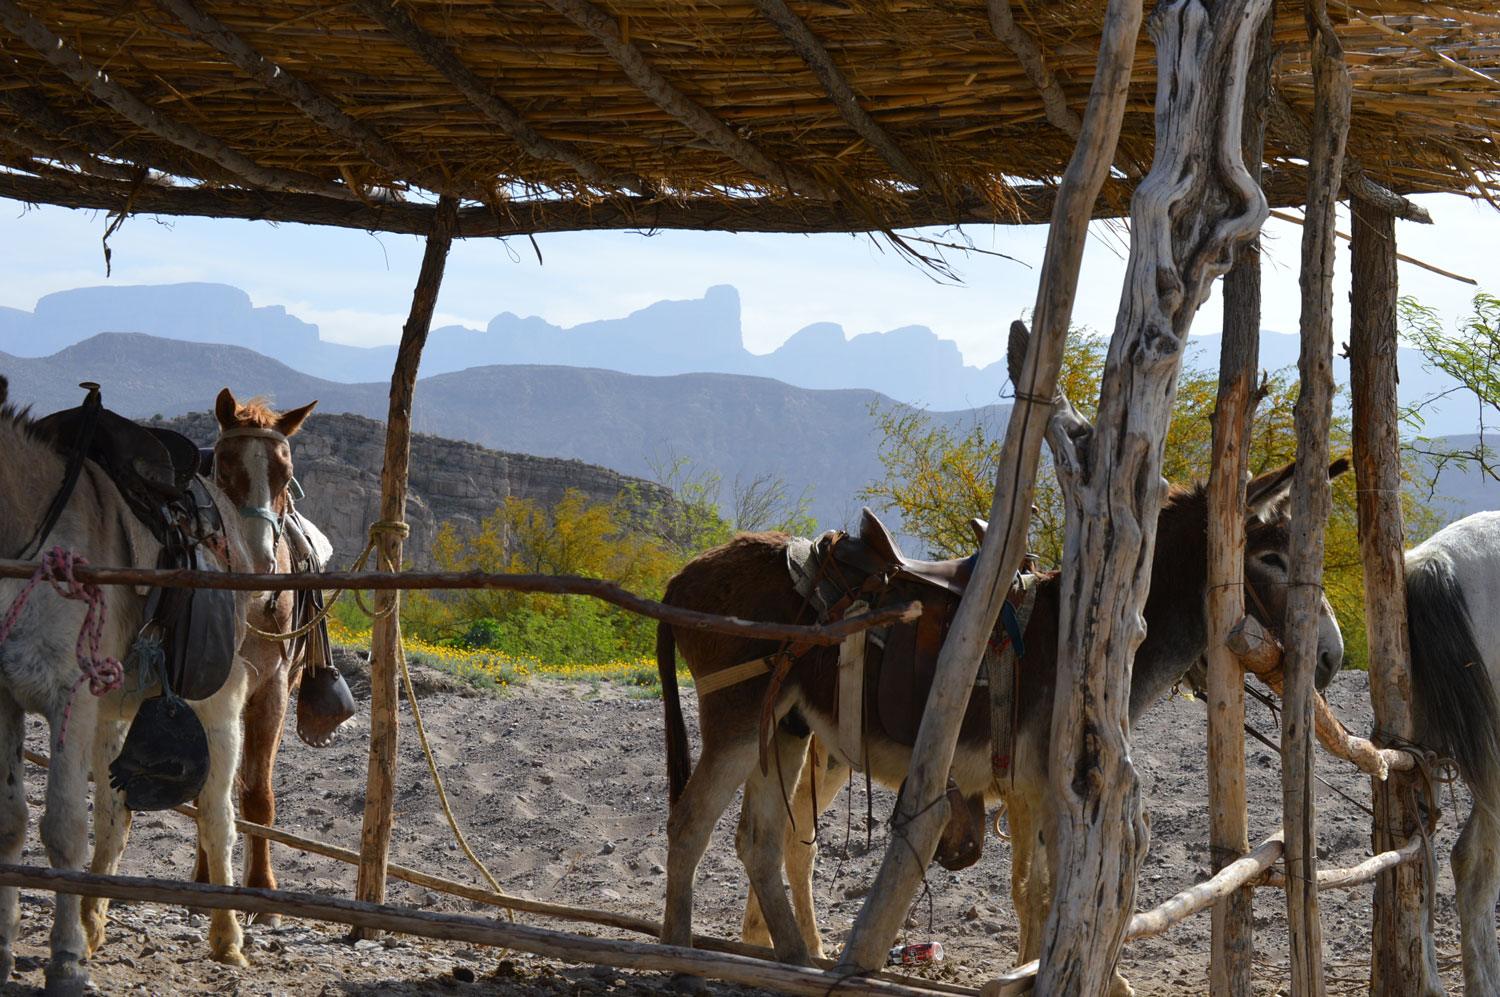 Saddled burros under a rustic shady shed near Boquillas, Mexico, with the Sierra del Carmen mountains in the background